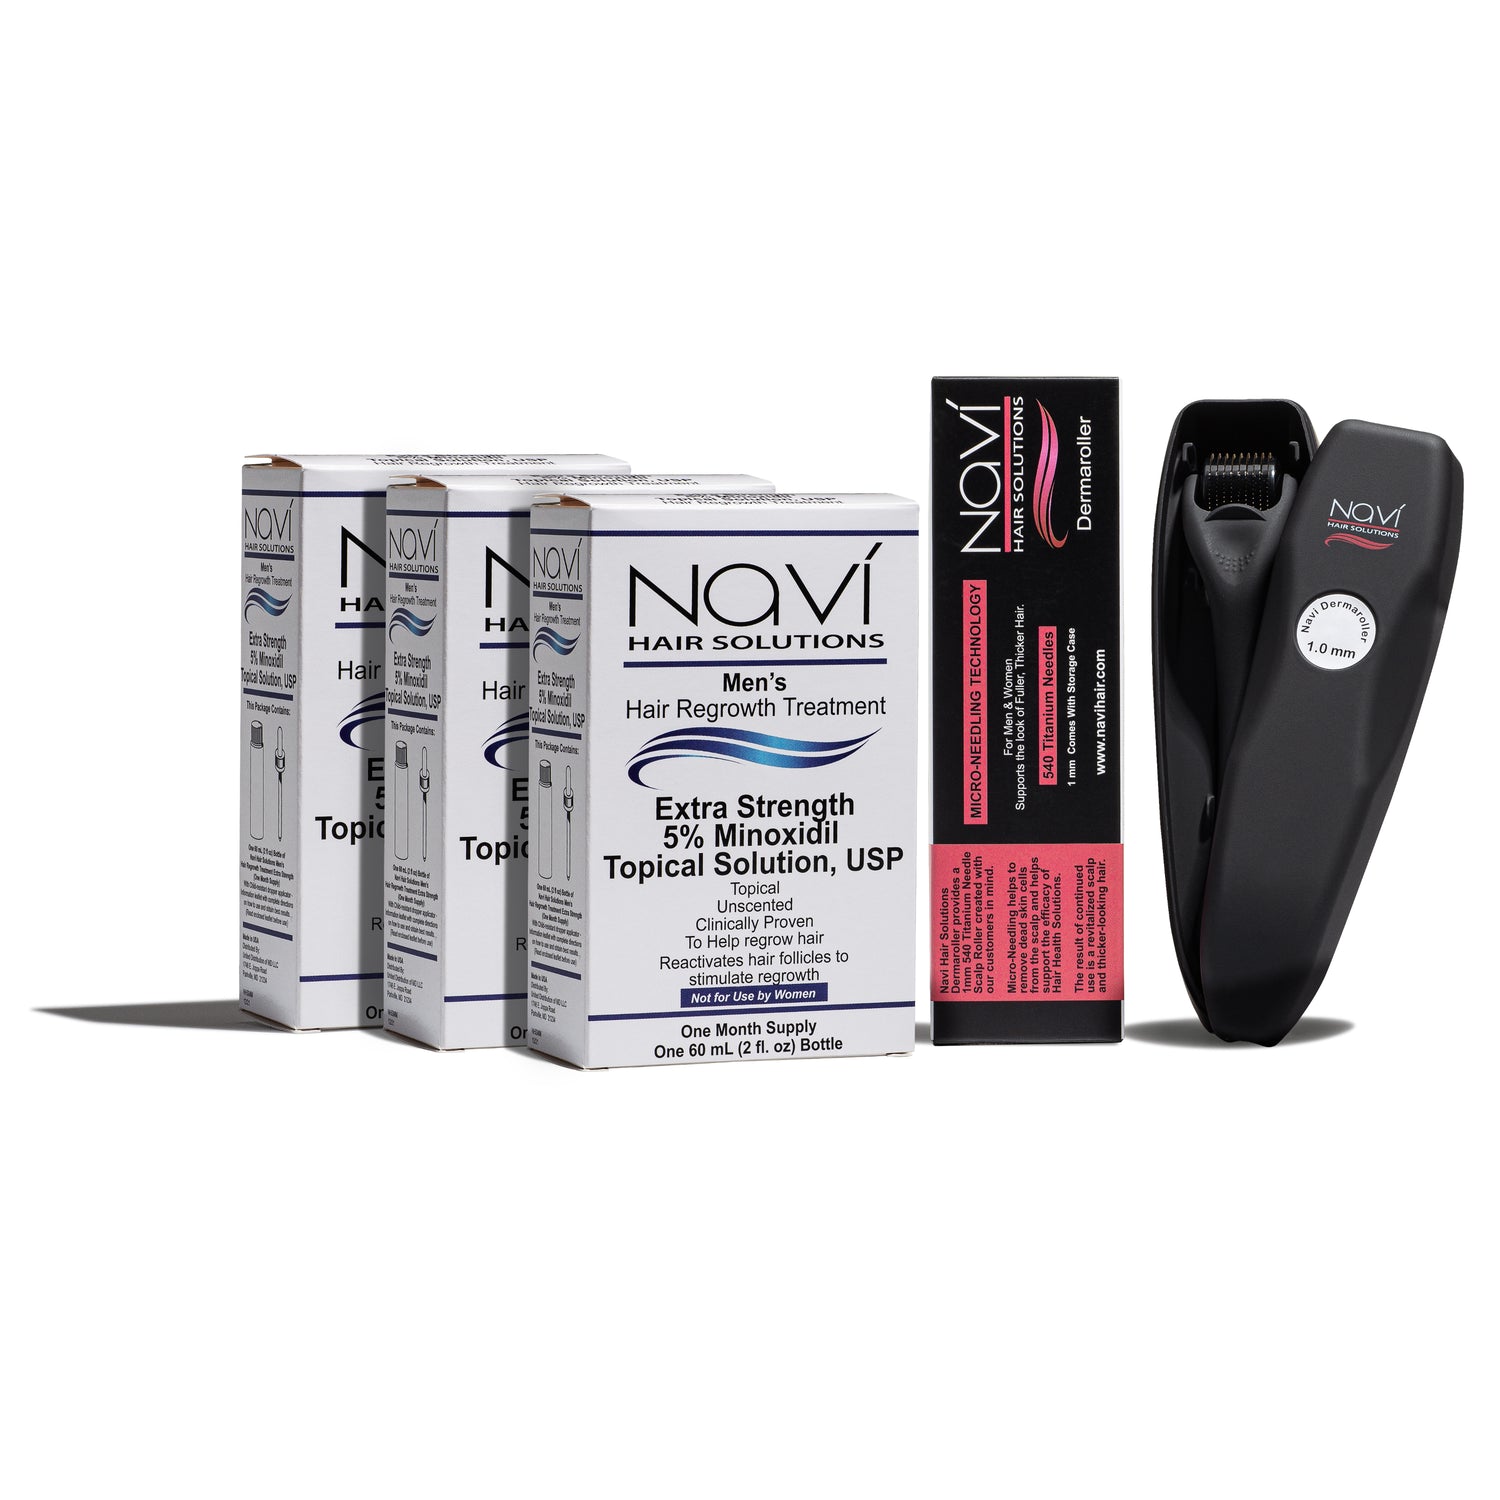 Men's FDA Approved 5% Minoxidil Topical Treatment Extra Strength clinically proven to regrow hair and scalp derma roller